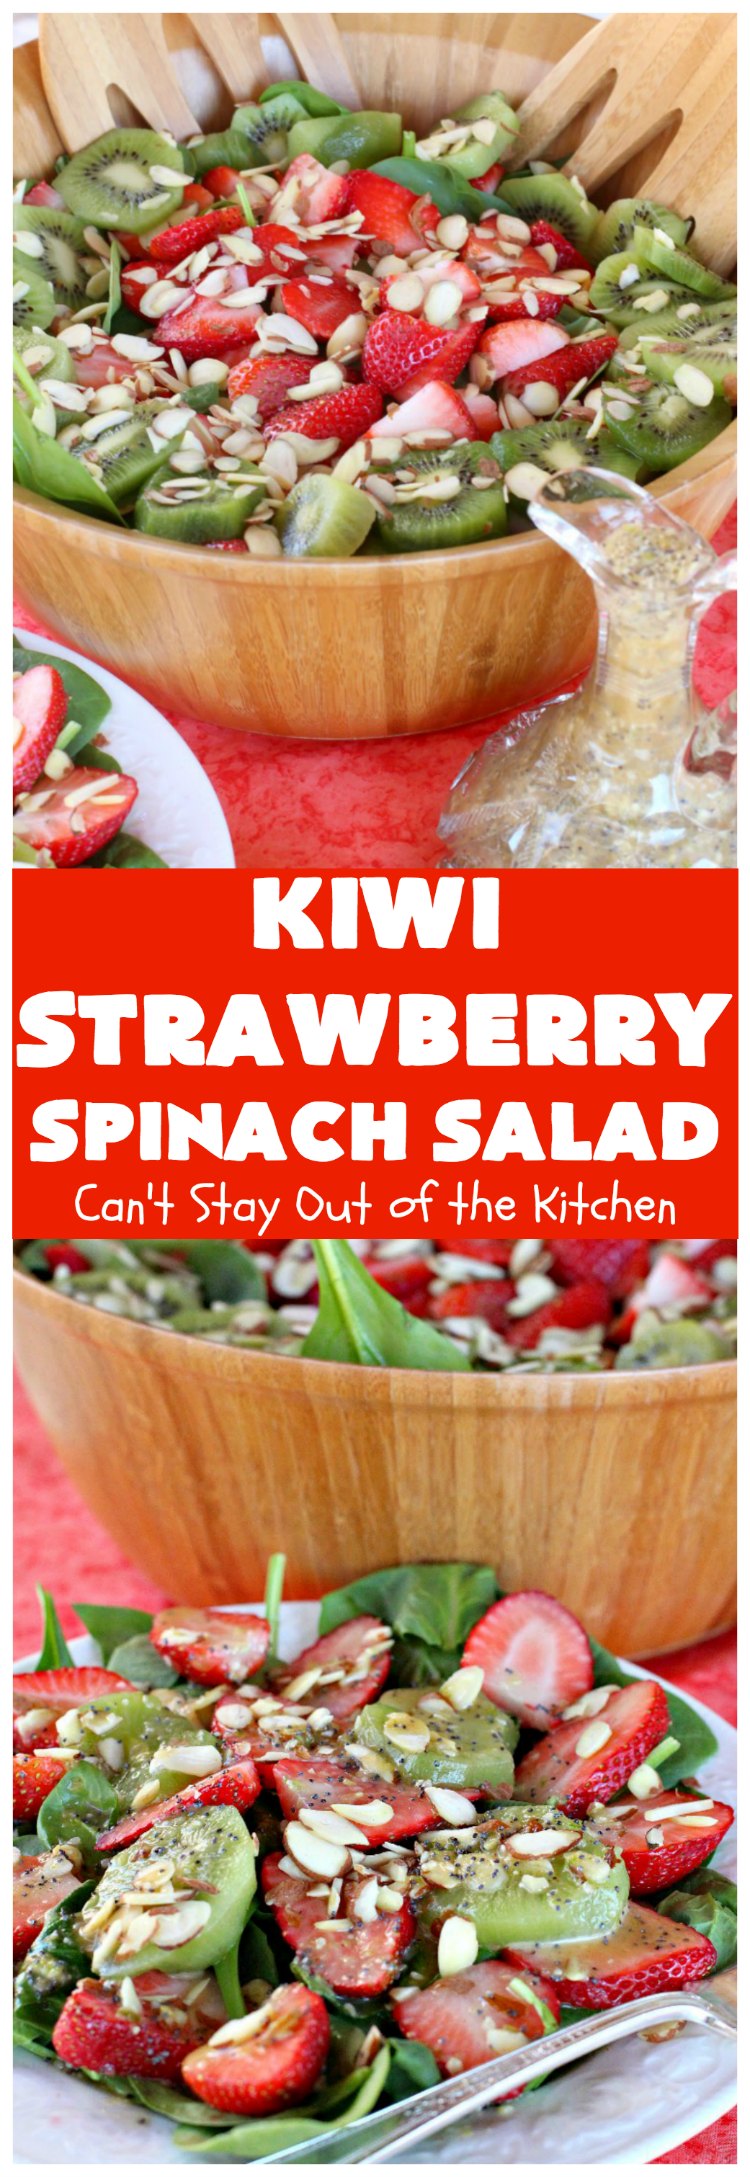 Kiwi-Strawberry Spinach Salad | Can't Stay Out of the Kitchen